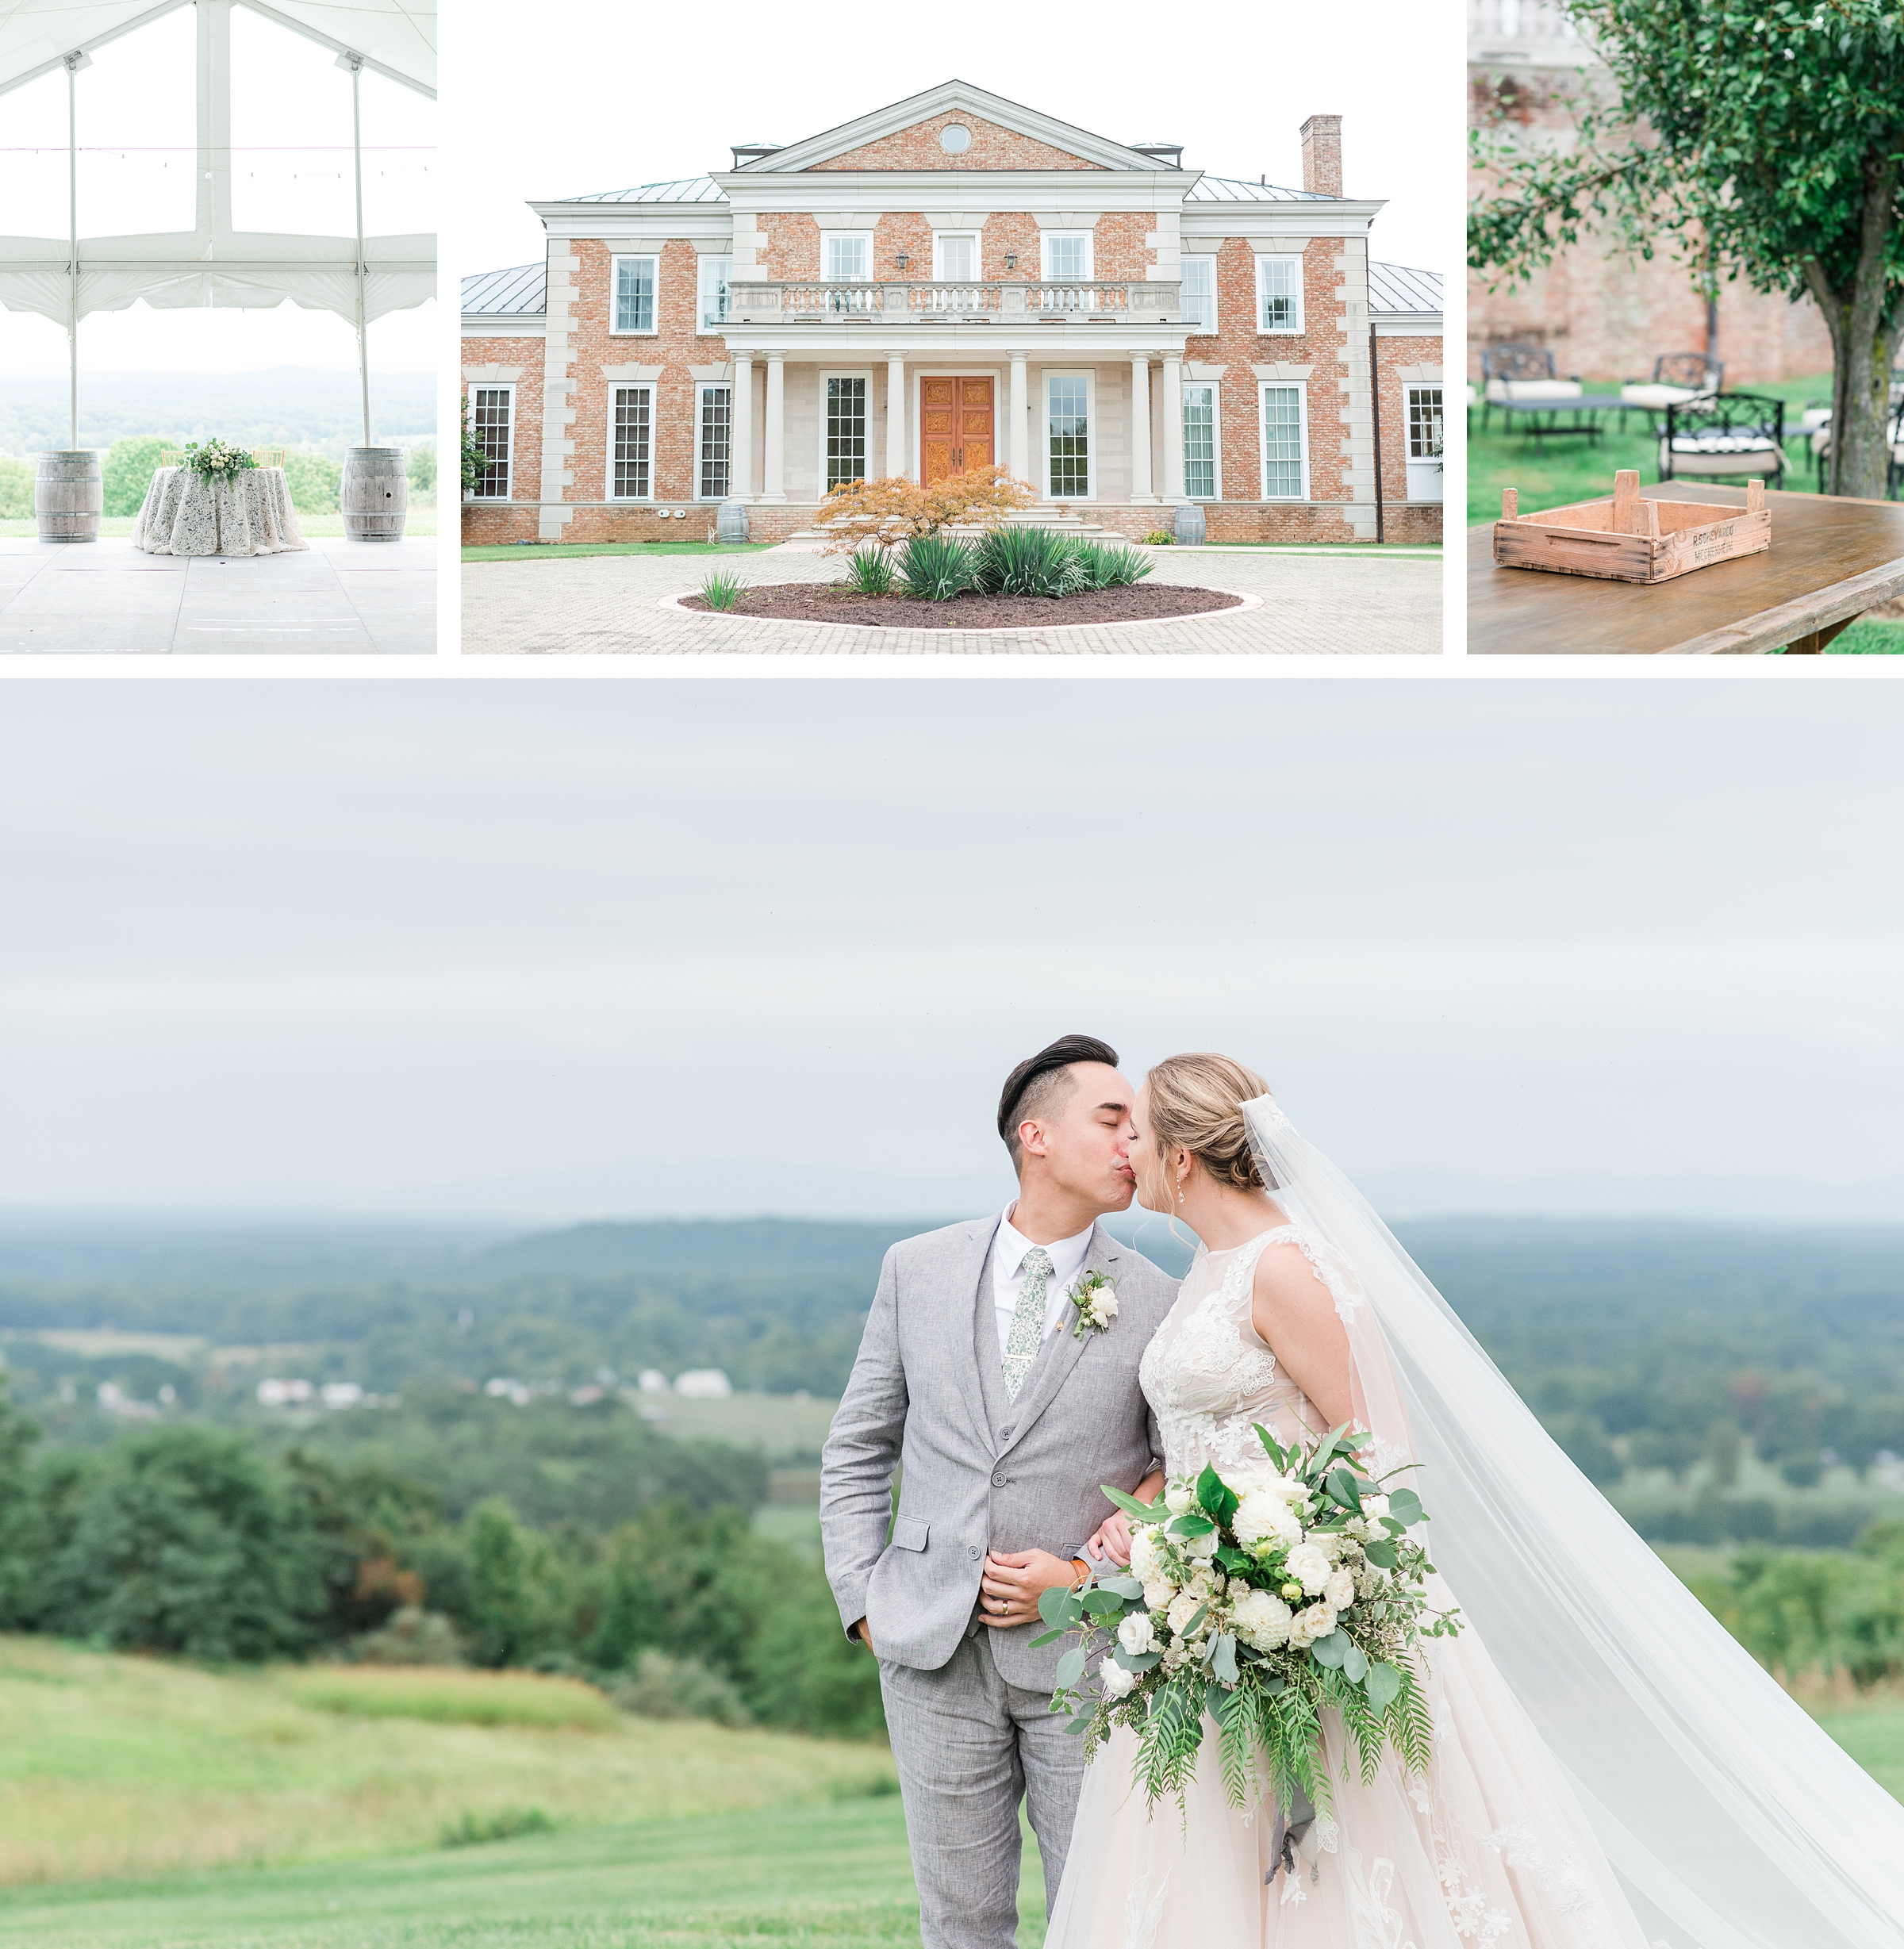 Grace Estate Winery wedding by Virginia wedding photographer Kailey Brianne Photography 